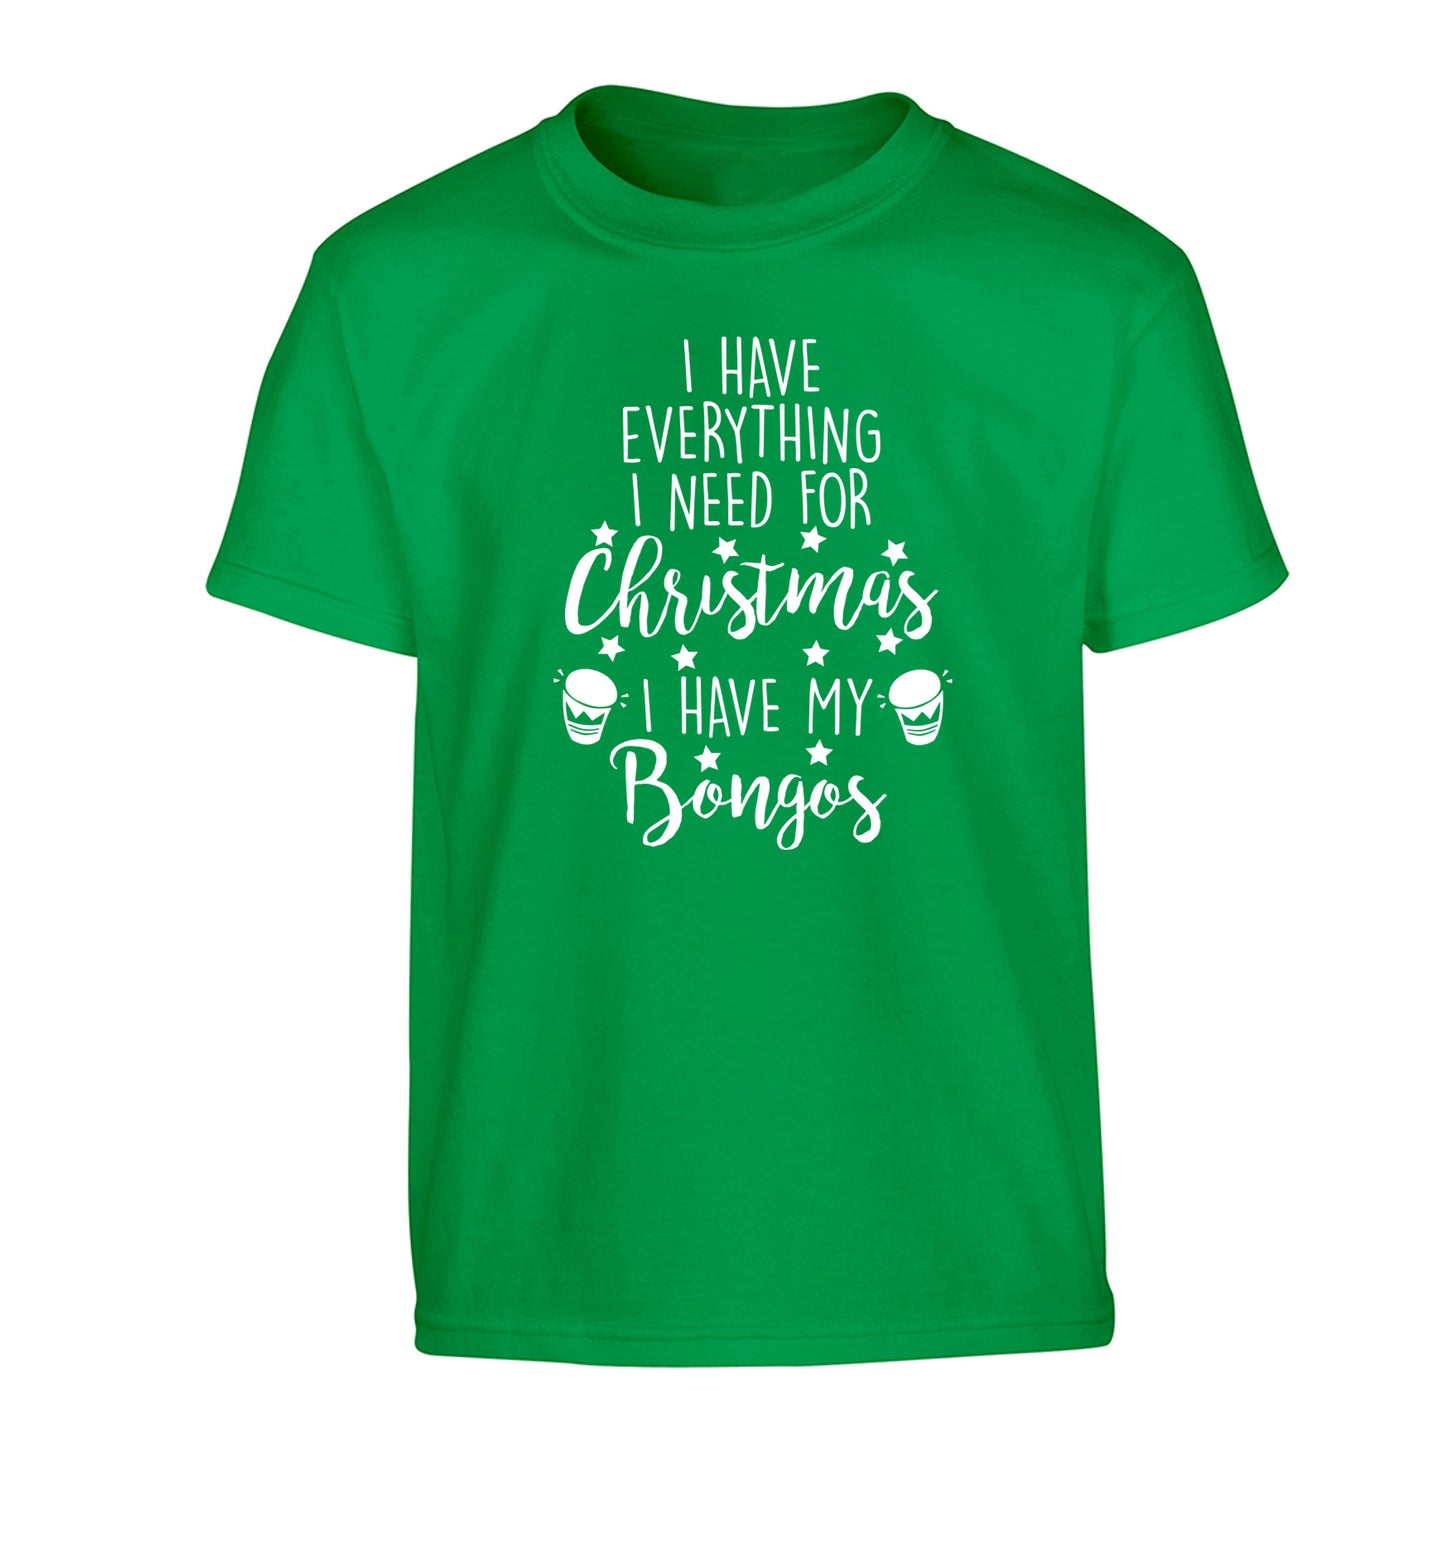 I have everything I need for Christmas I have my bongos! Children's green Tshirt 12-14 Years